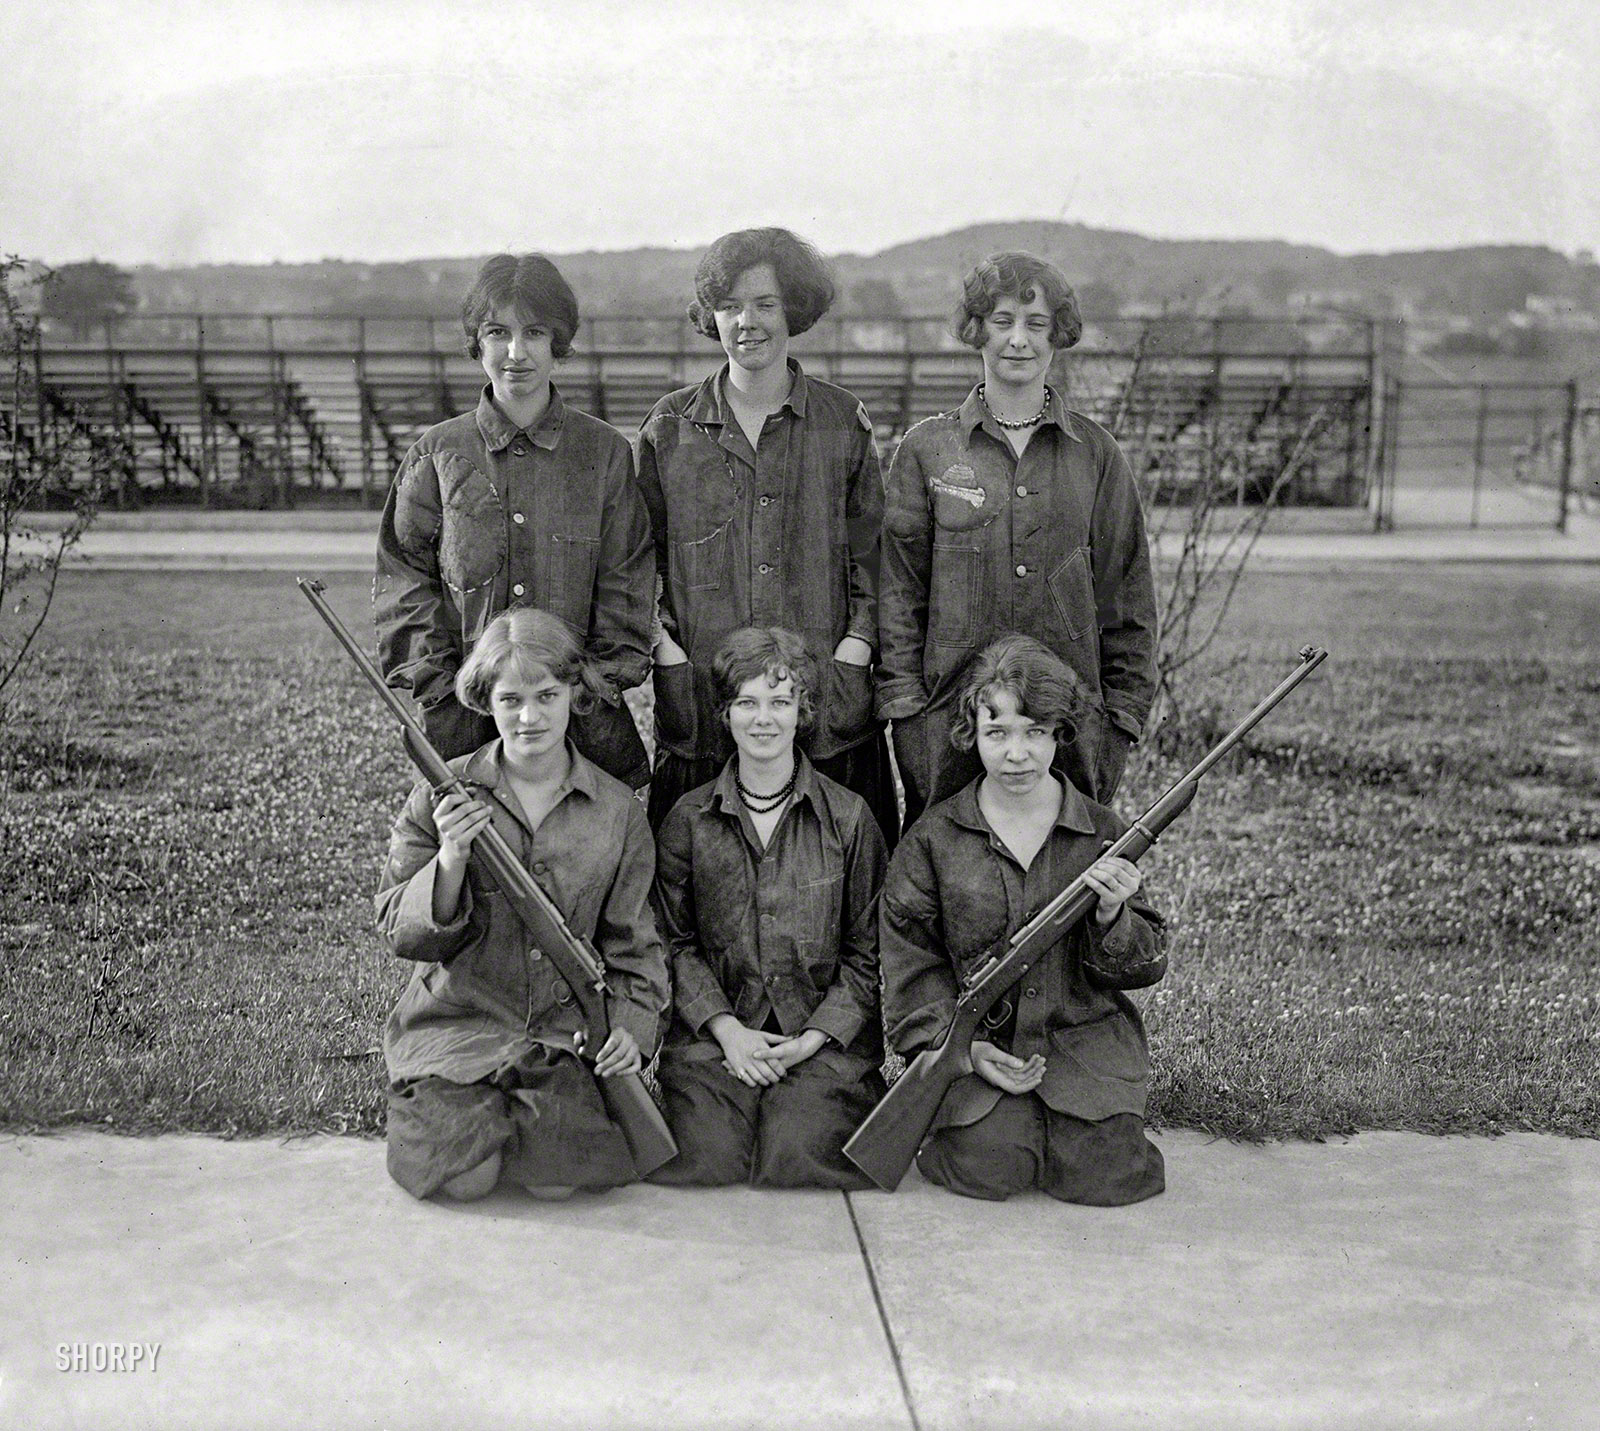 May 29, 1925. "Central High Rifle Team." Rumor has it these girls are loaded. National Photo Company Collection glass negative. View full size.